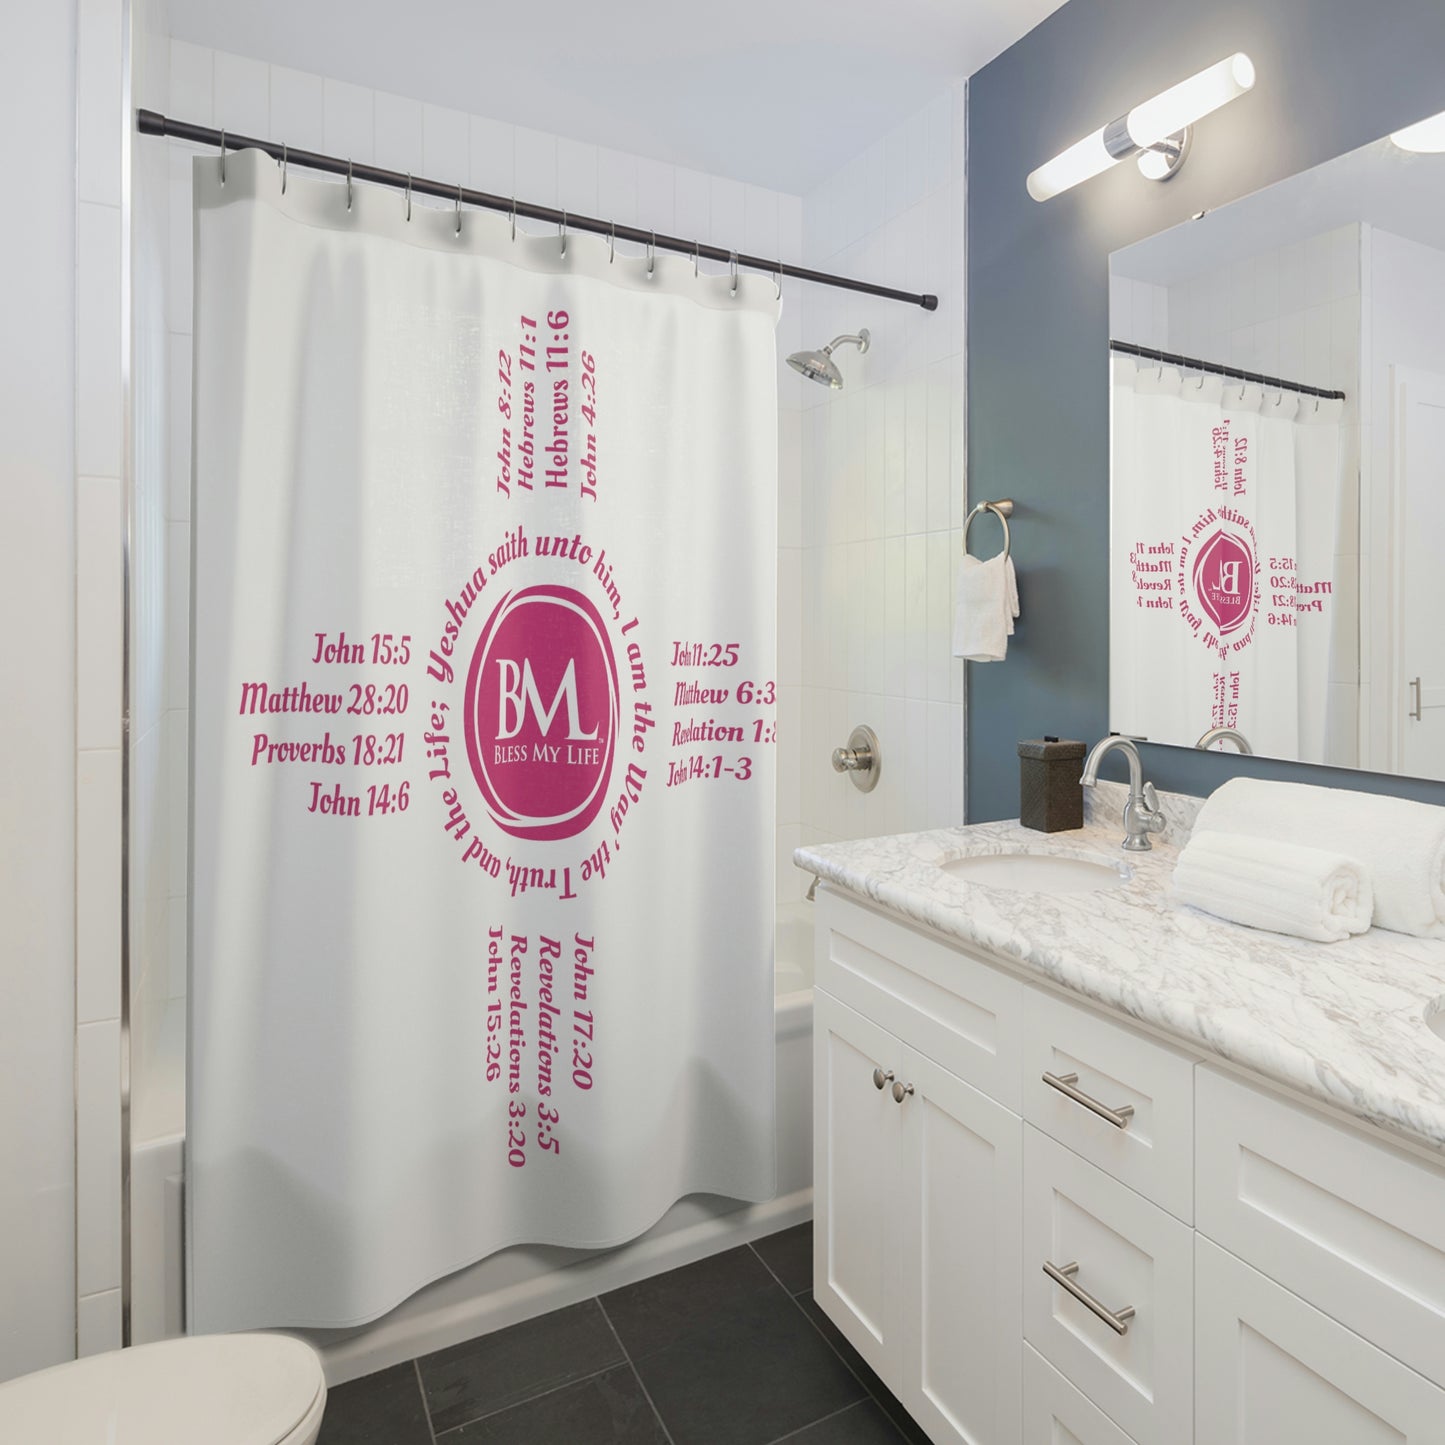 Zia Symbols with Biblical Scriptures, A New Mexico Icon & Favorite! White Shower Curtains with Pink Zia!